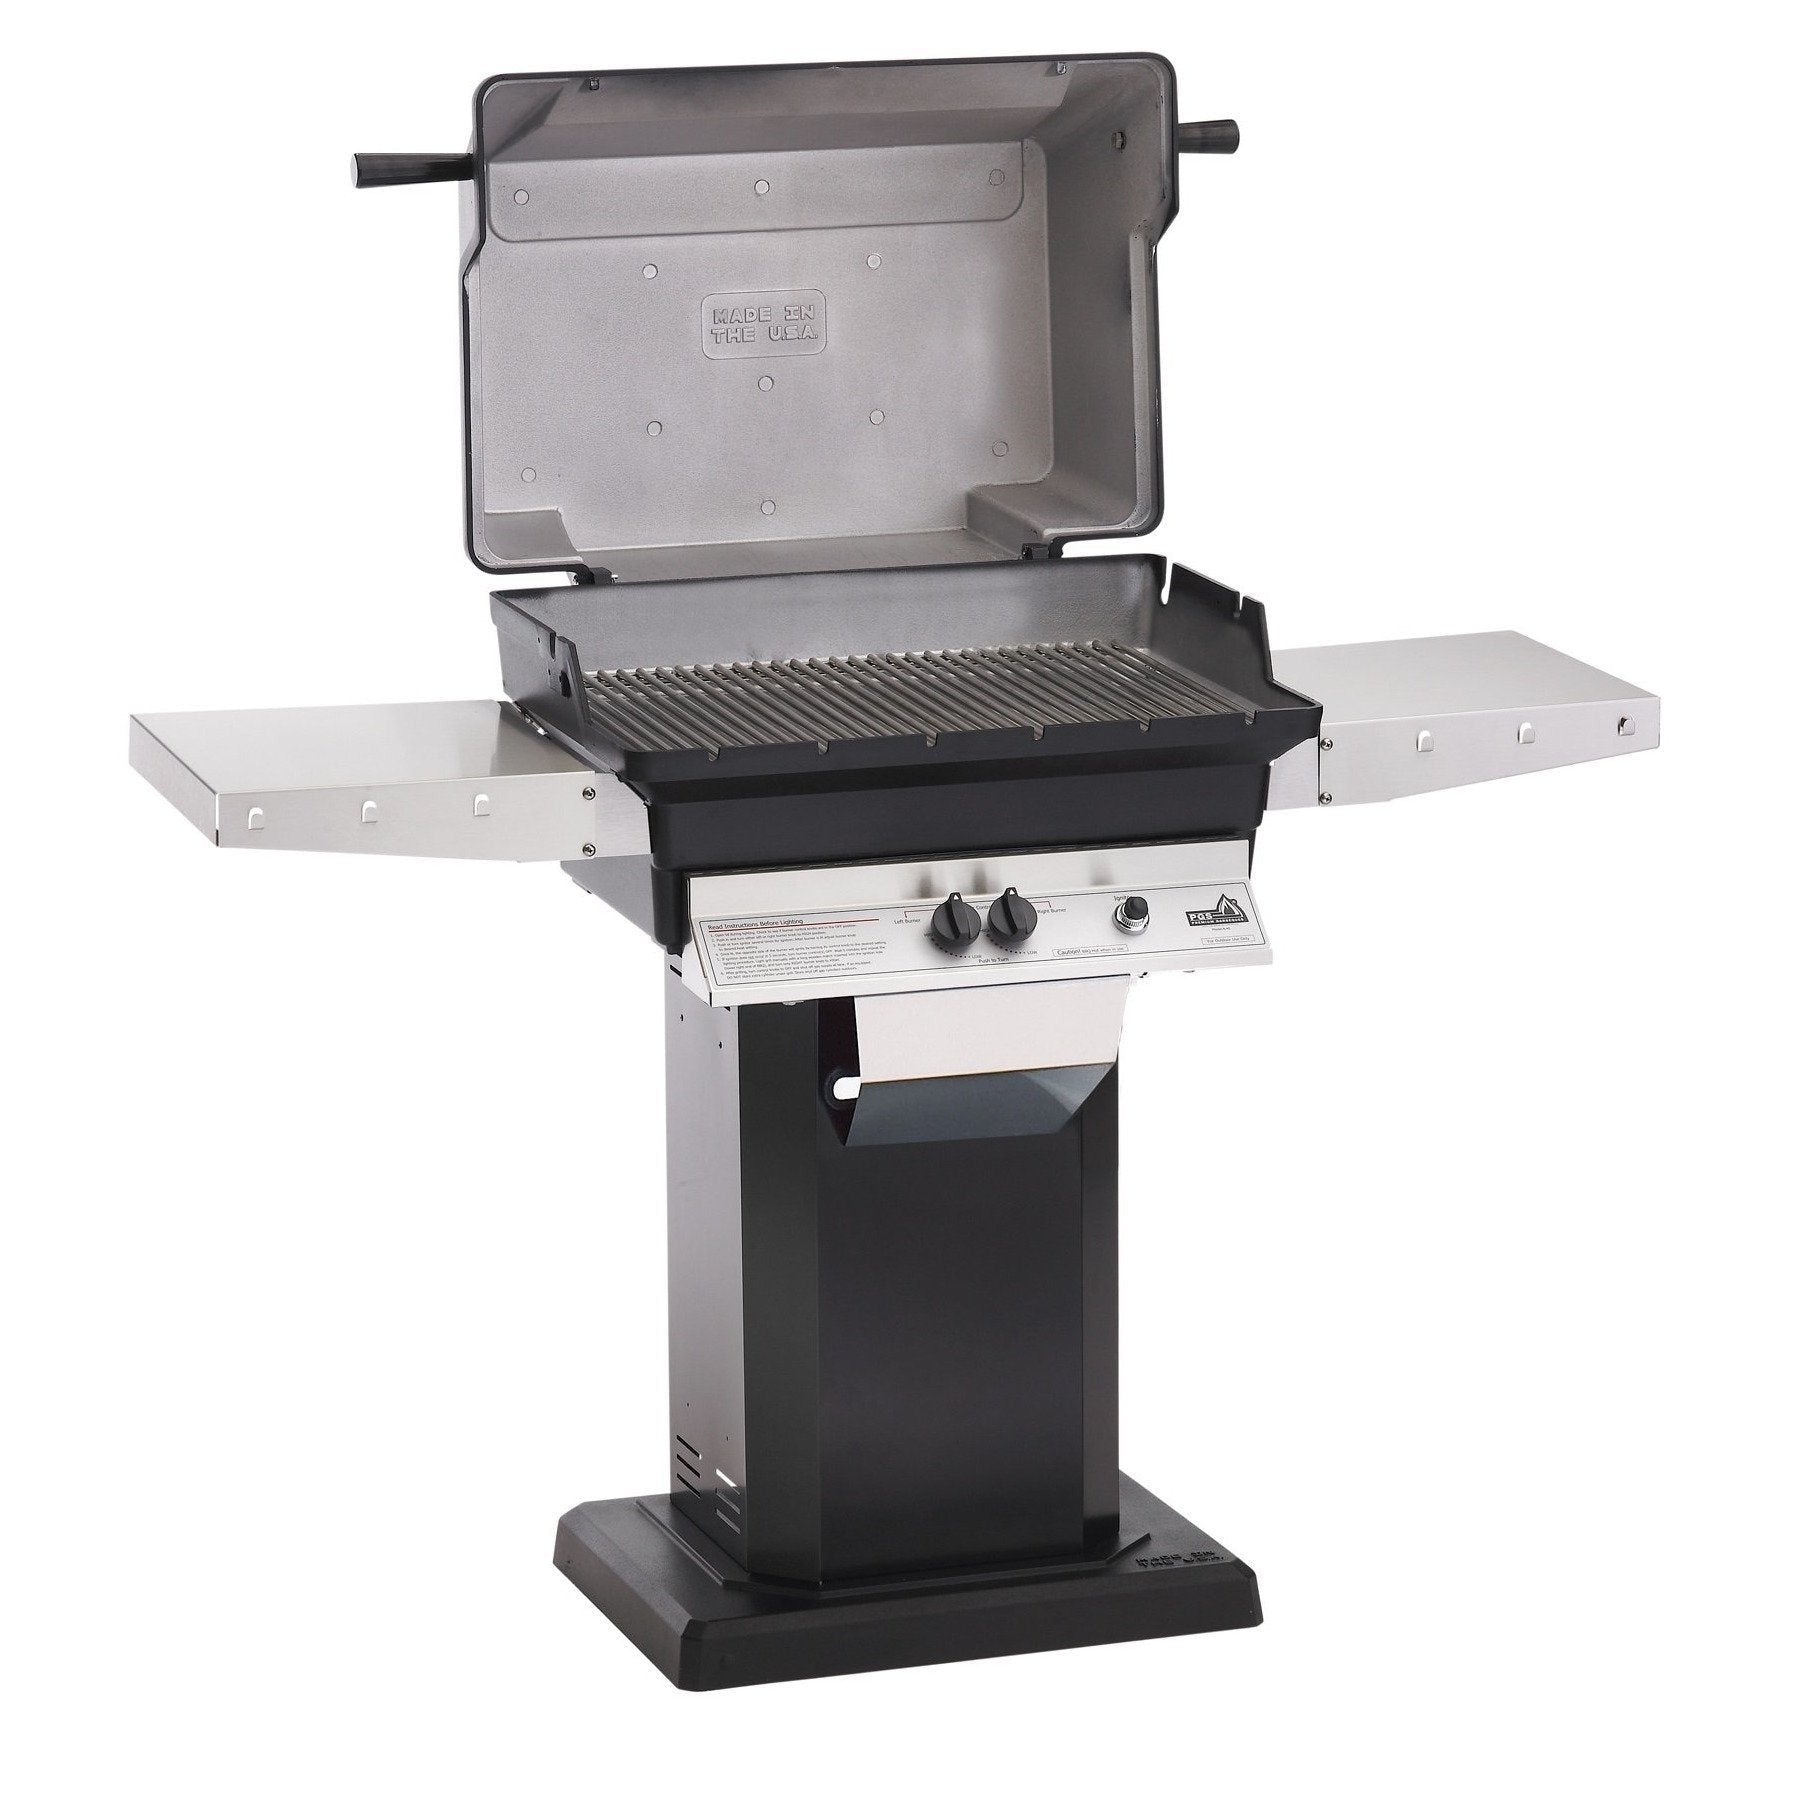 PGS "A" Series Liquid Propane Gas Grill 40,000 BTUs - A40LP Performance Grilling Systems Black Powder Coated Pedestal + Flat Patio Base 